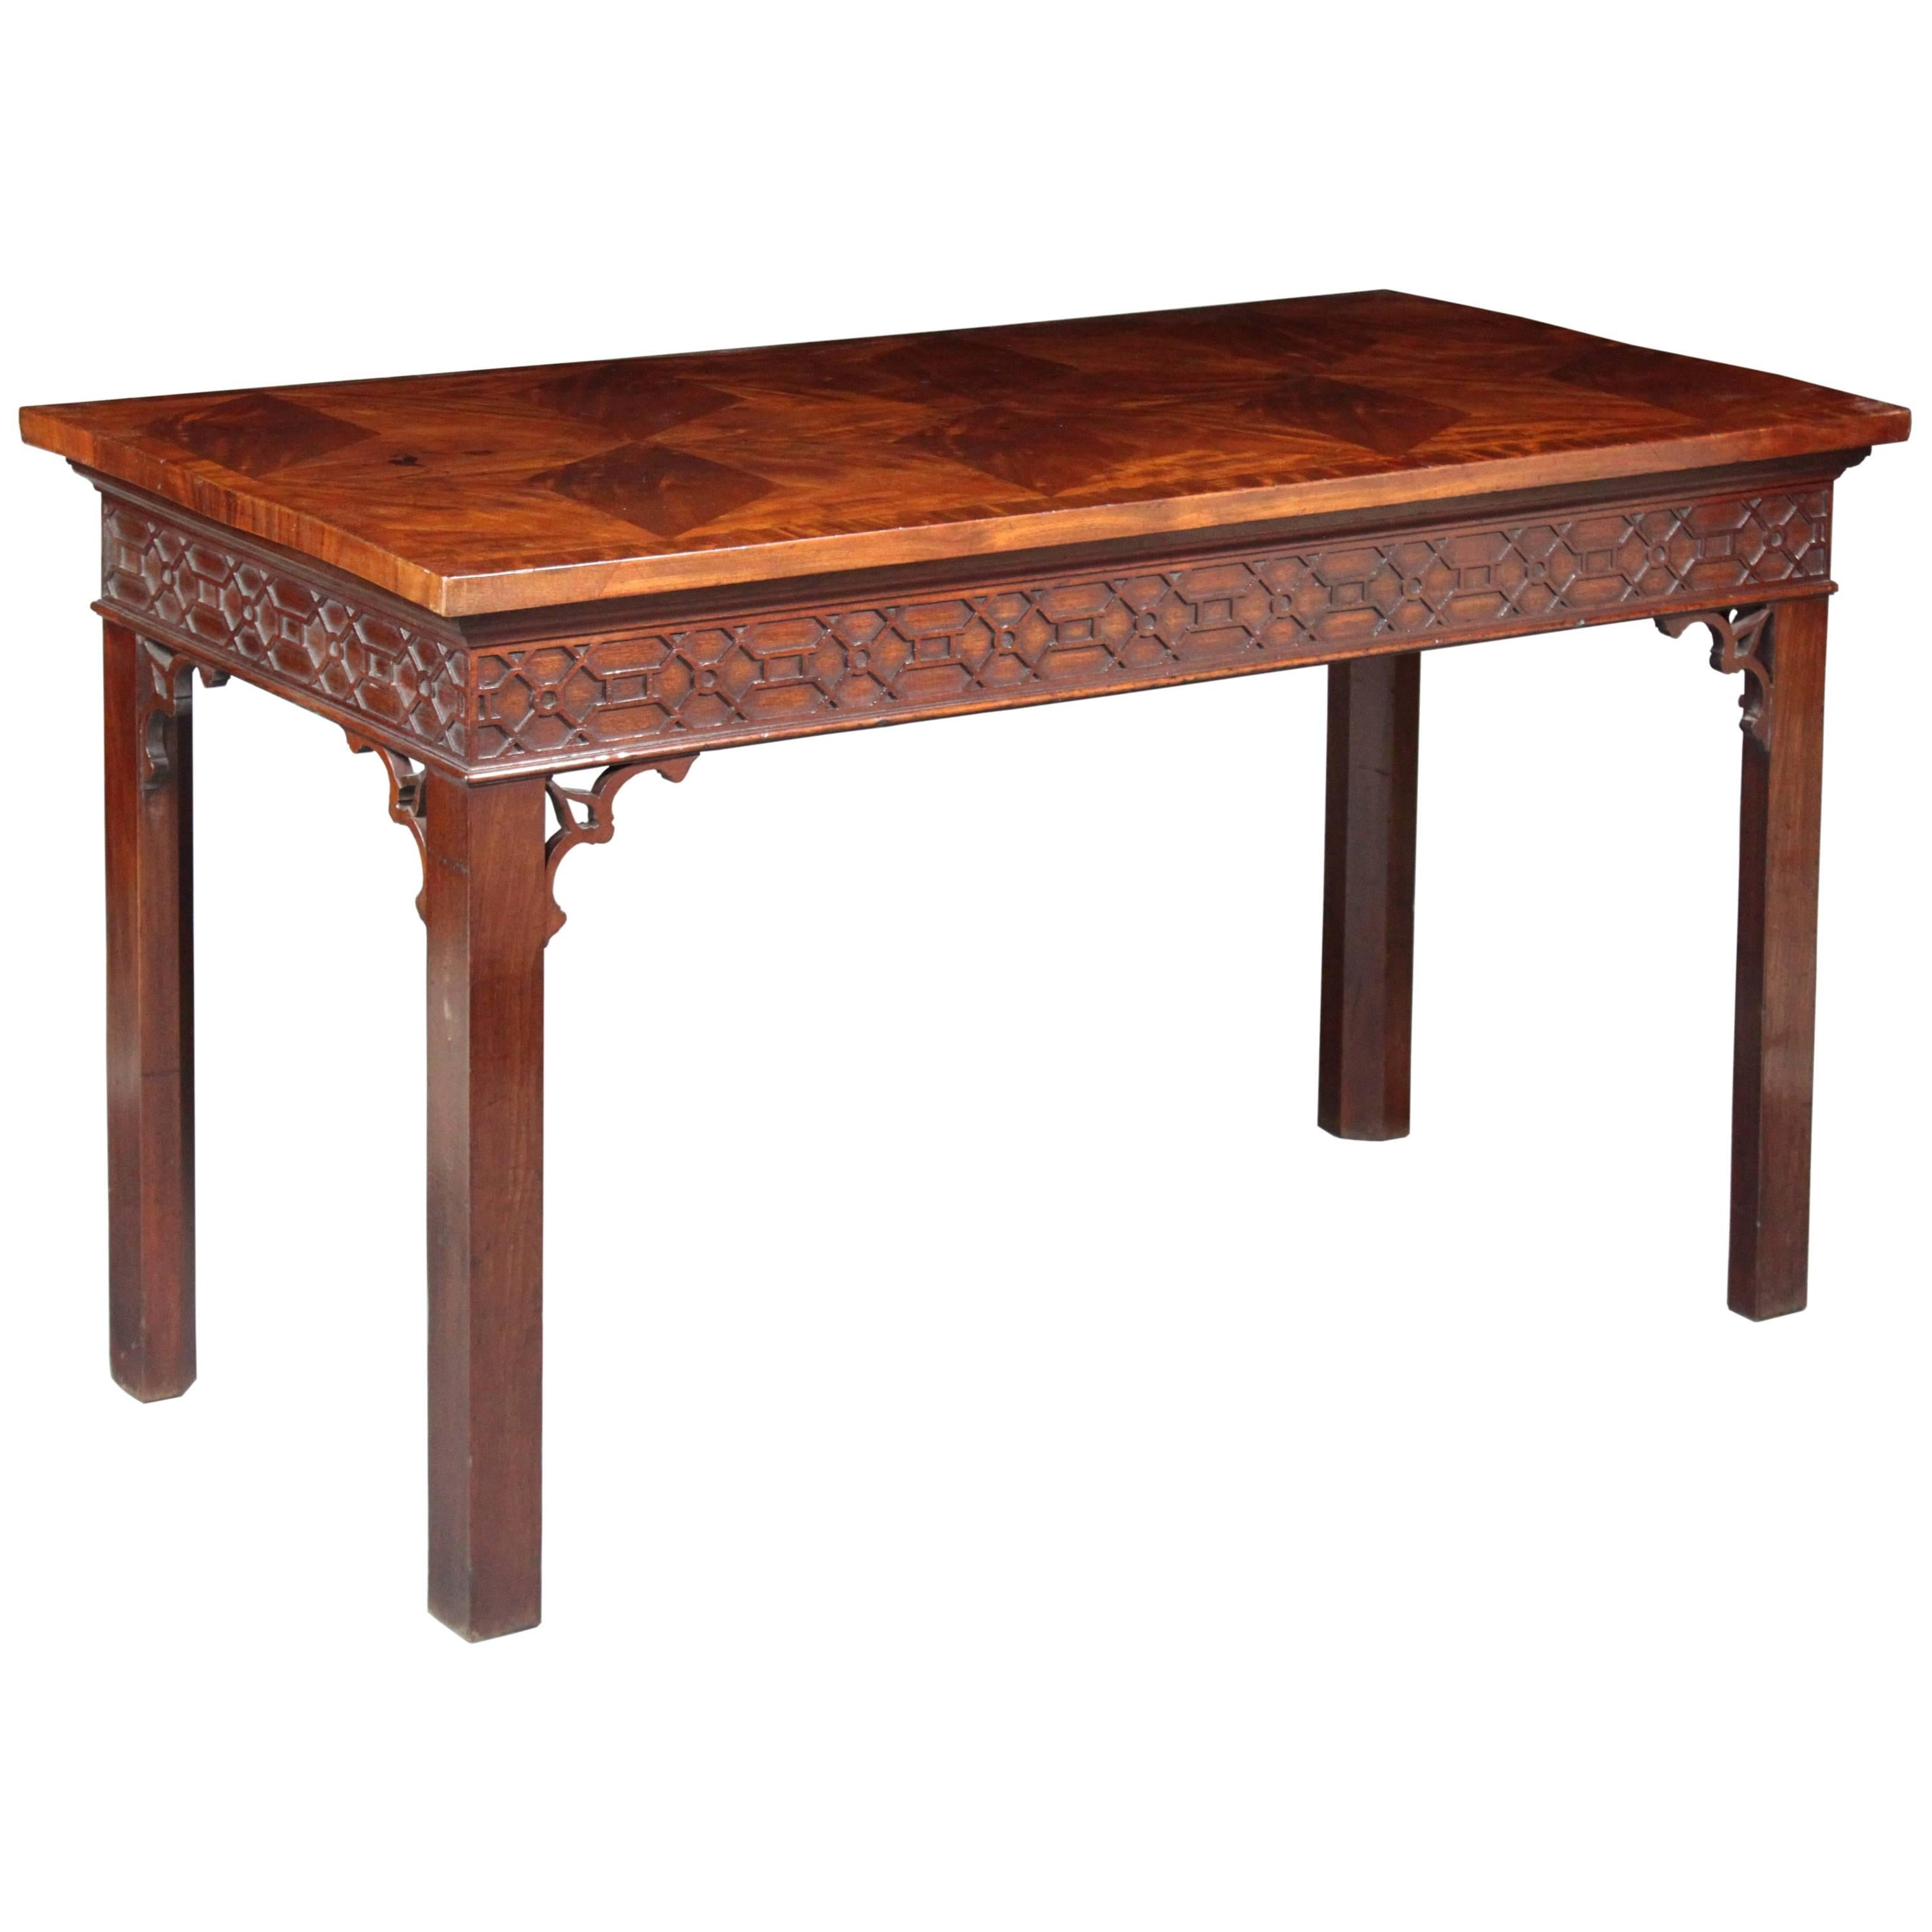 Chippendale Serving Table with a Parquetry Top